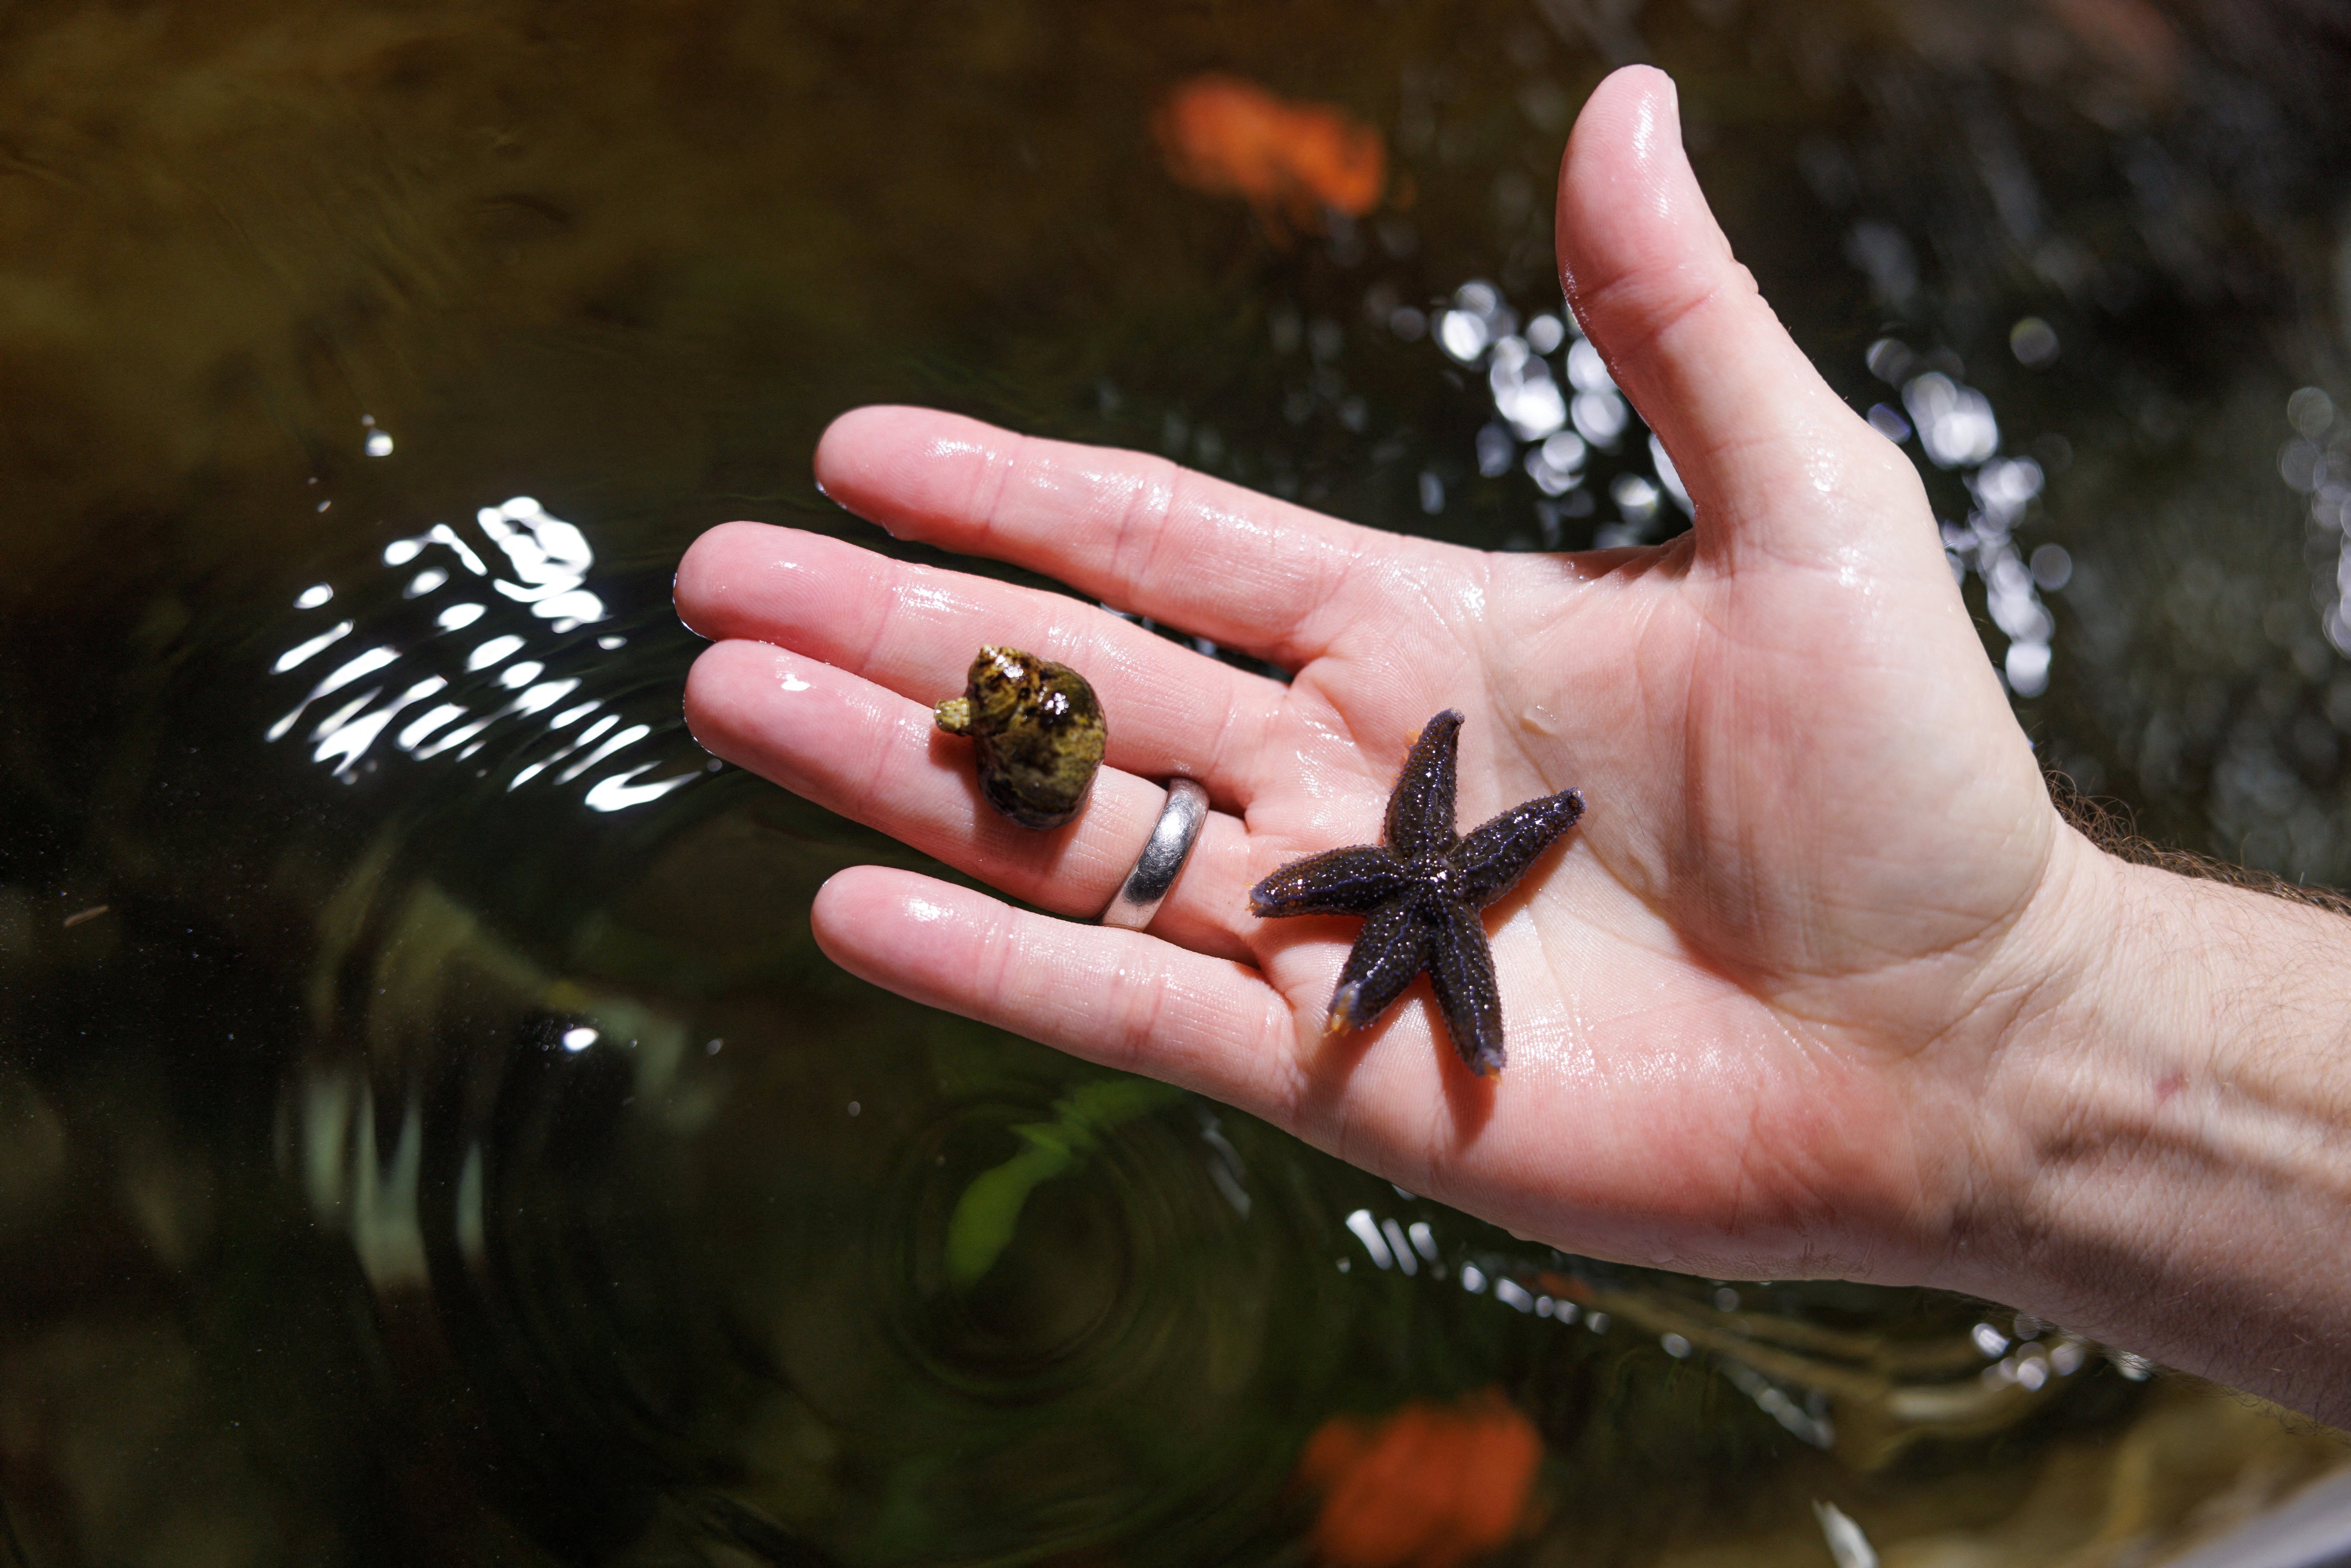 Thorsten Reusch, a marine scientist for Geomar, holds a snail and a starfish in his palm as he inspects the tanks containing seagrass at the lab in Kiel, Germany, 19 April